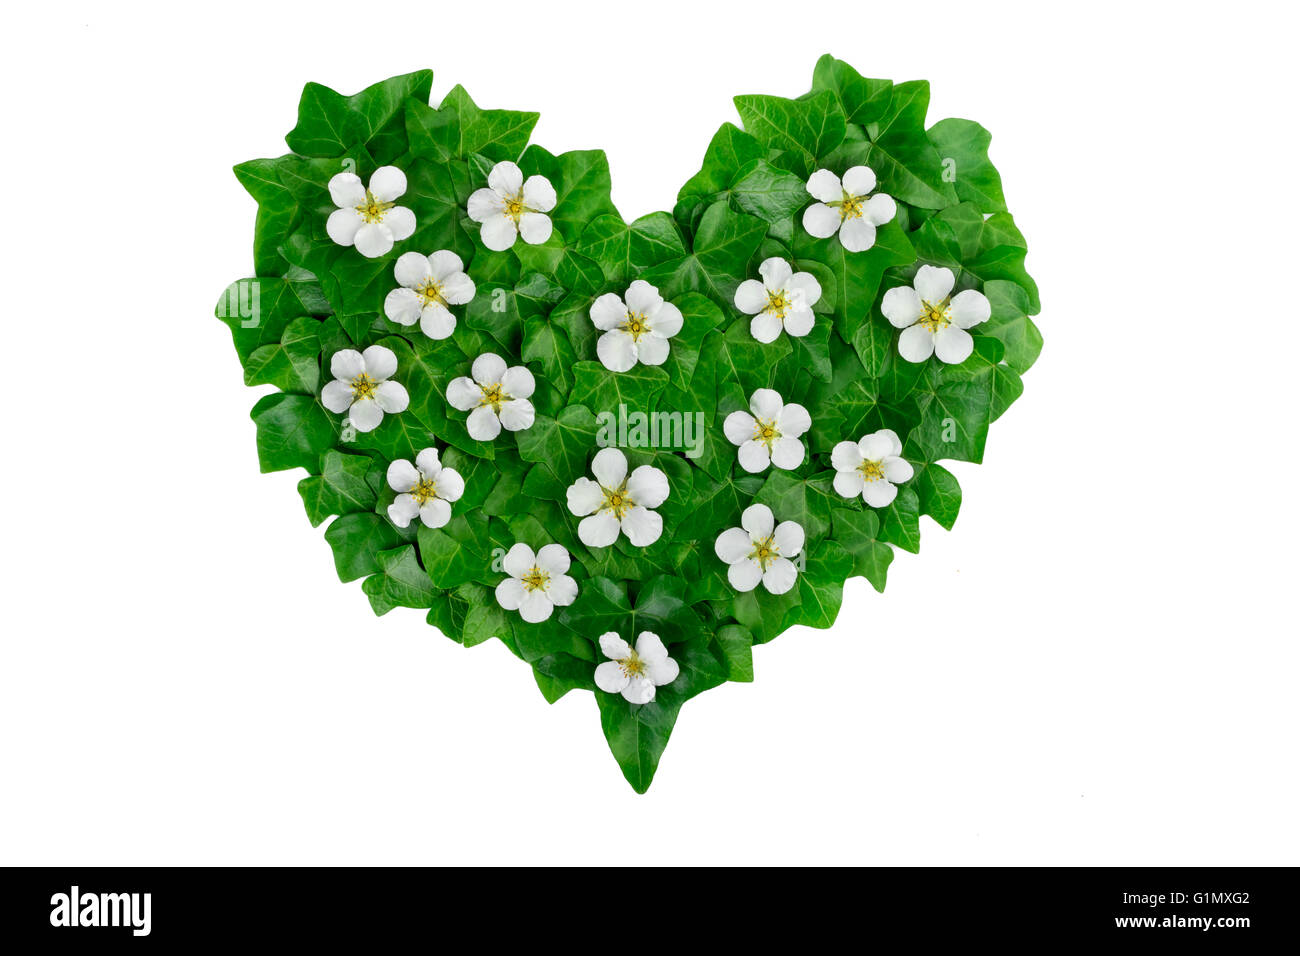 Green heart pattern made of ivy leaves and white flowers. Creative ...